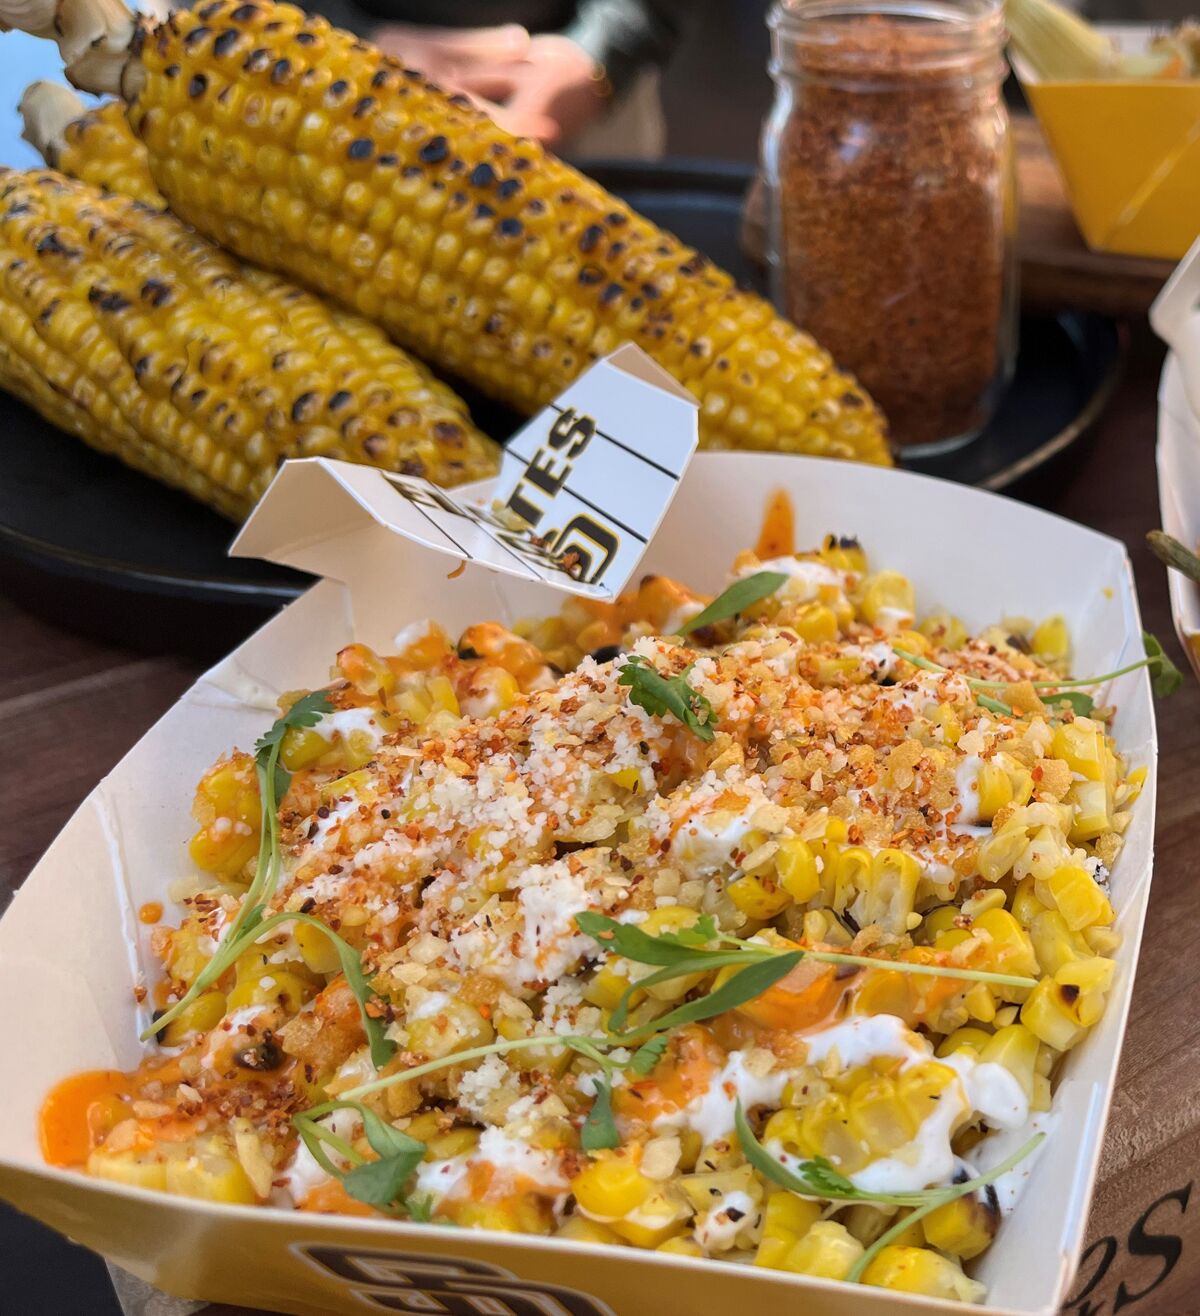 Mexican street corn and stuffed jalapenos at Petco Park.